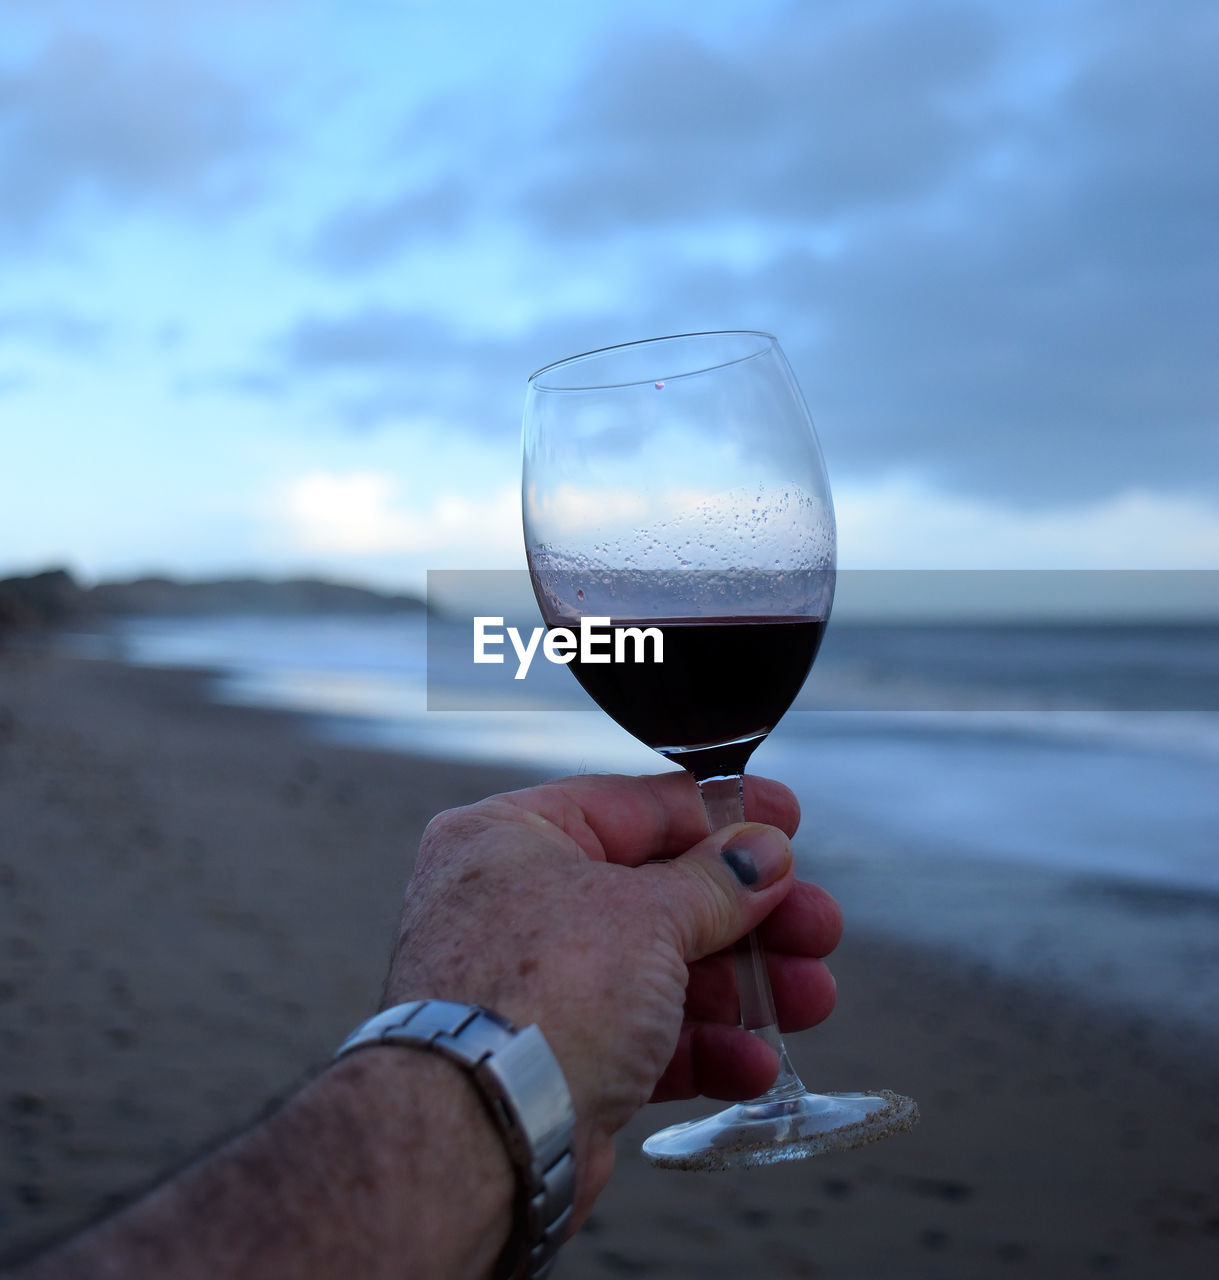 CLOSE-UP OF HAND HOLDING WINEGLASS AGAINST BEACH